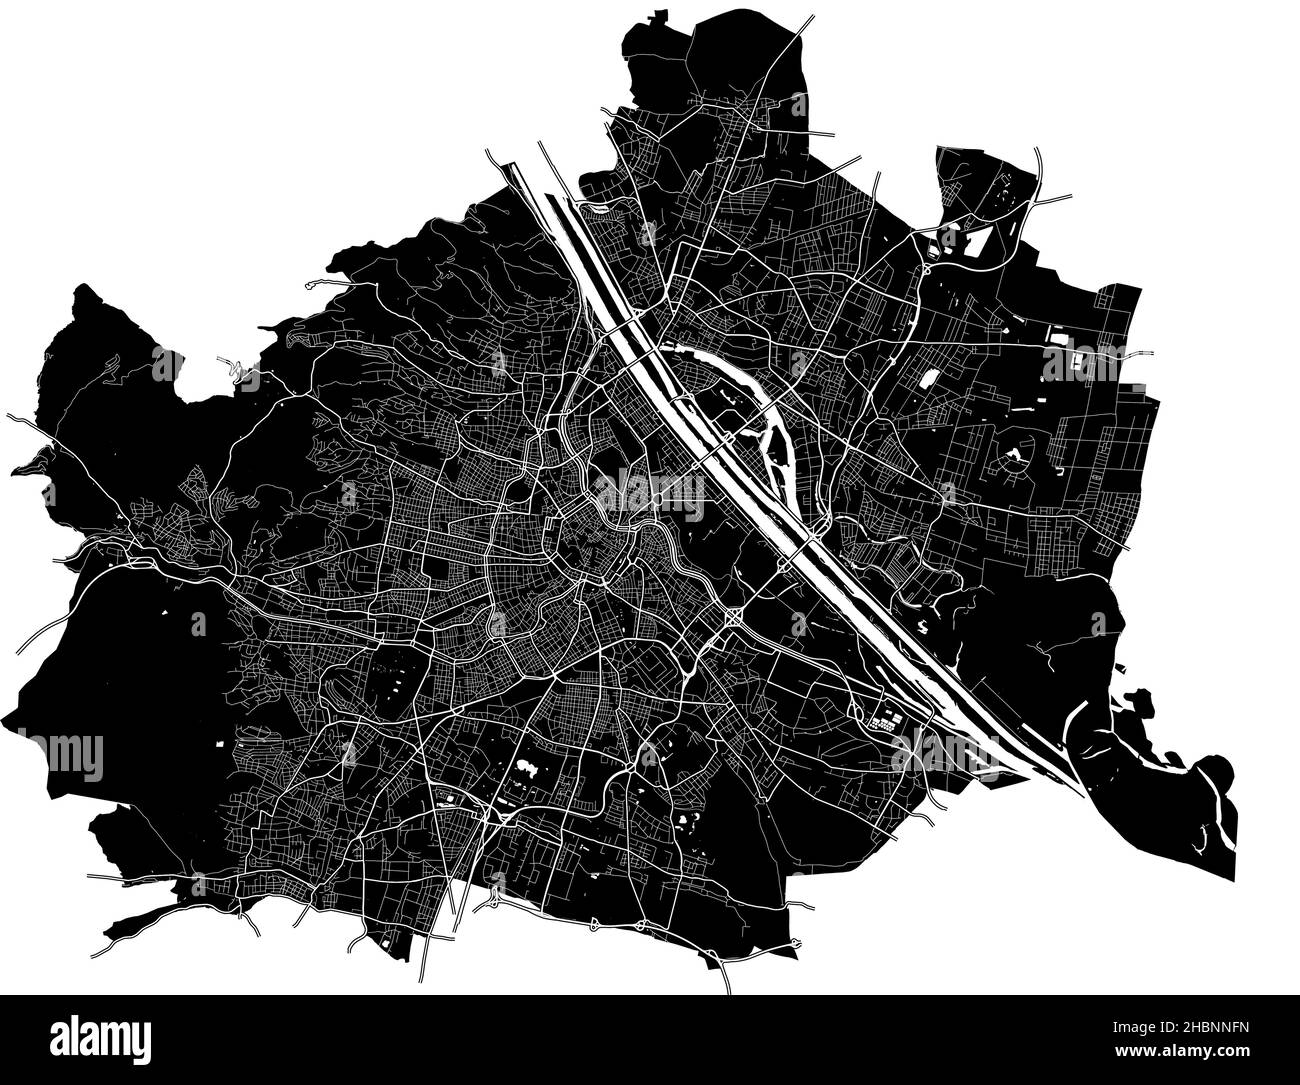 Vienna, Austria, high resolution vector map with city boundaries, and editable paths. The city map was drawn with white areas and lines for main roads Stock Vector